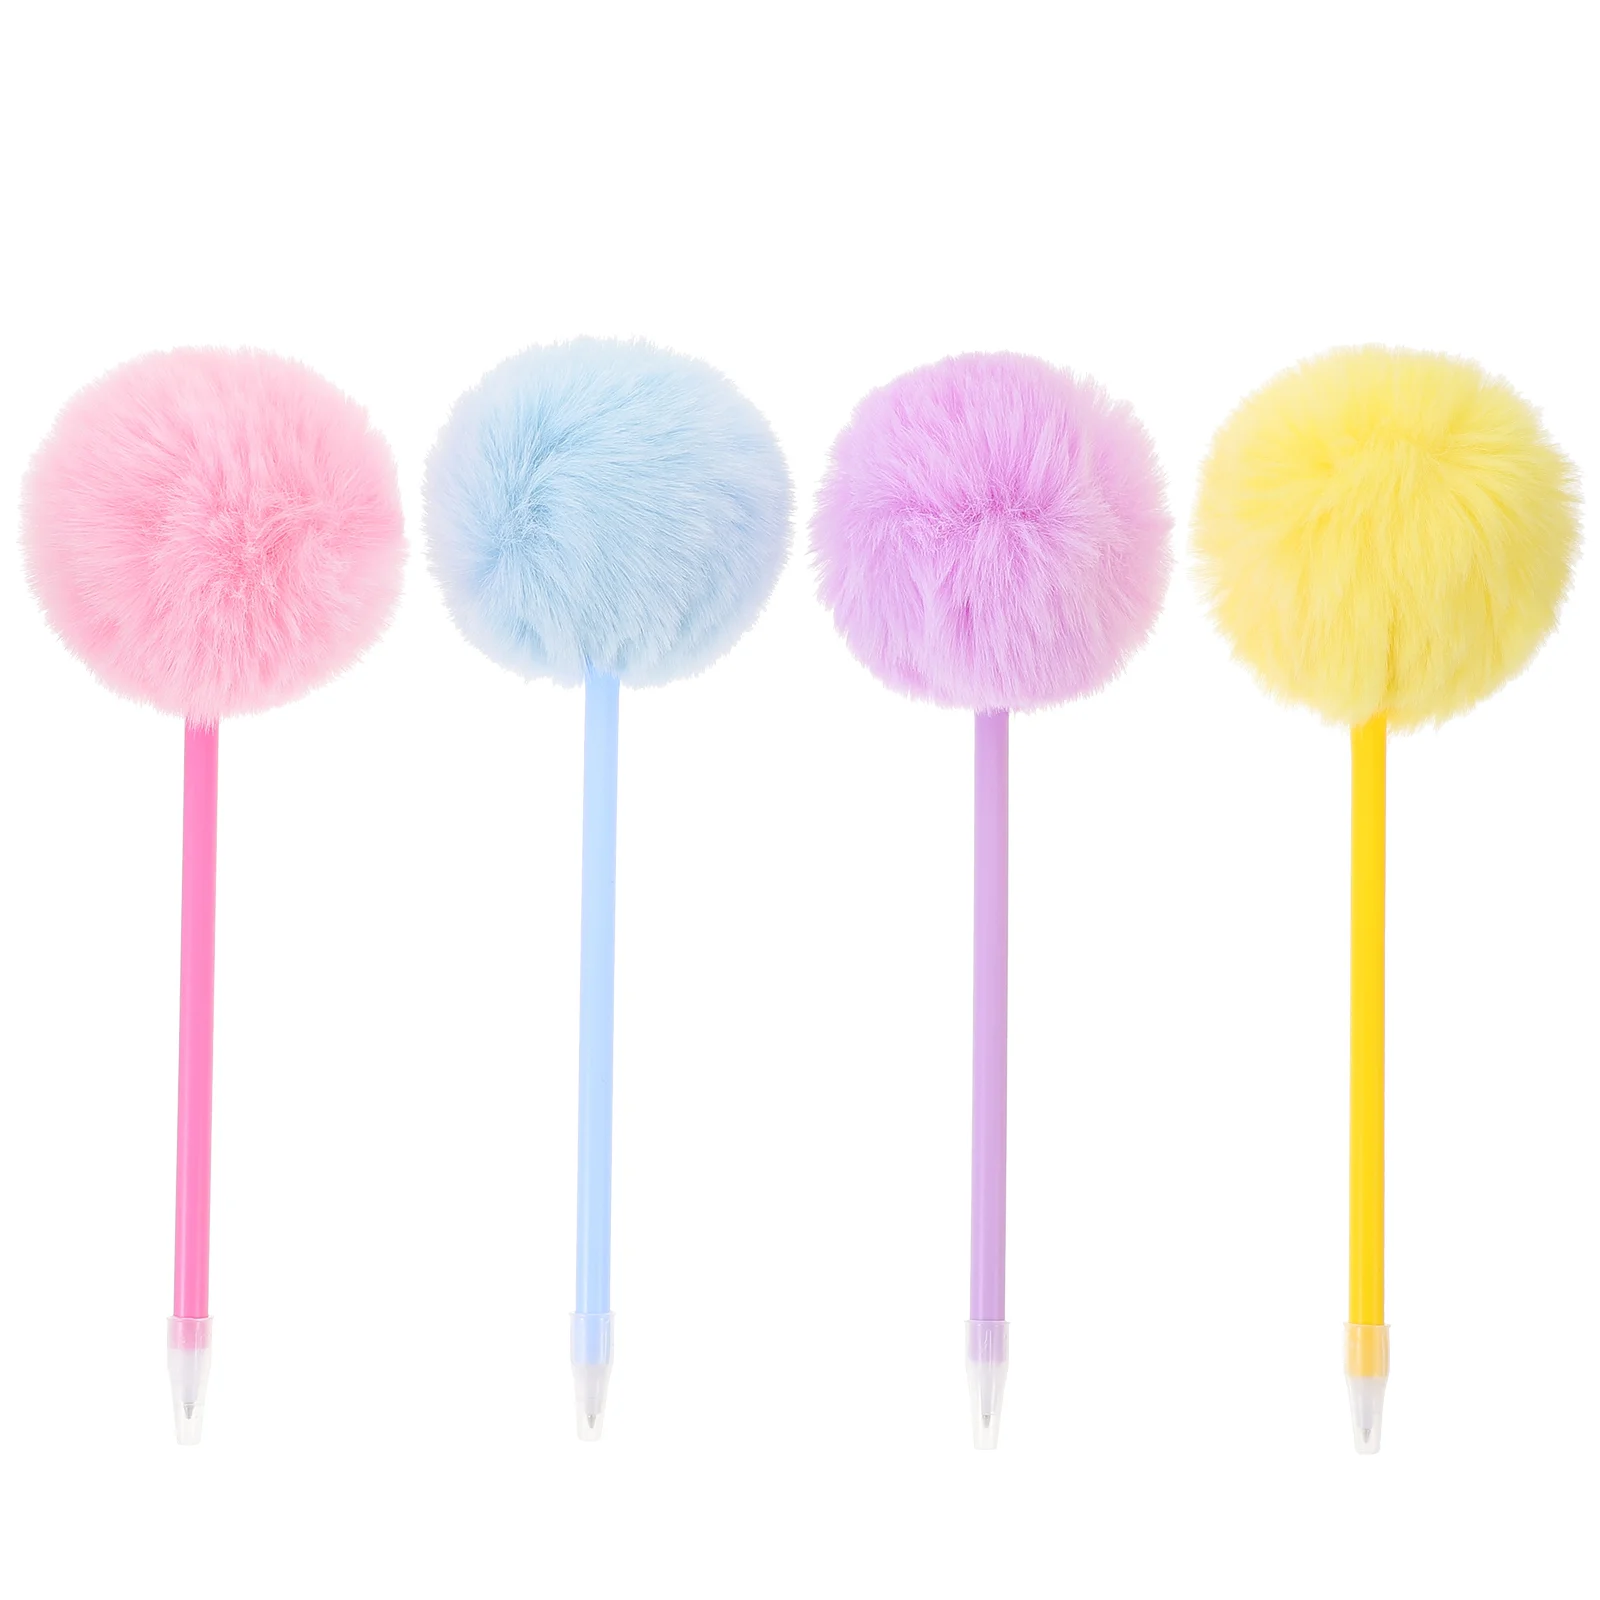 

4pcs Ballpoint Pen with Pom Pom Toppers Adorable Pom Pom Ballpoint Pen Portable Pen